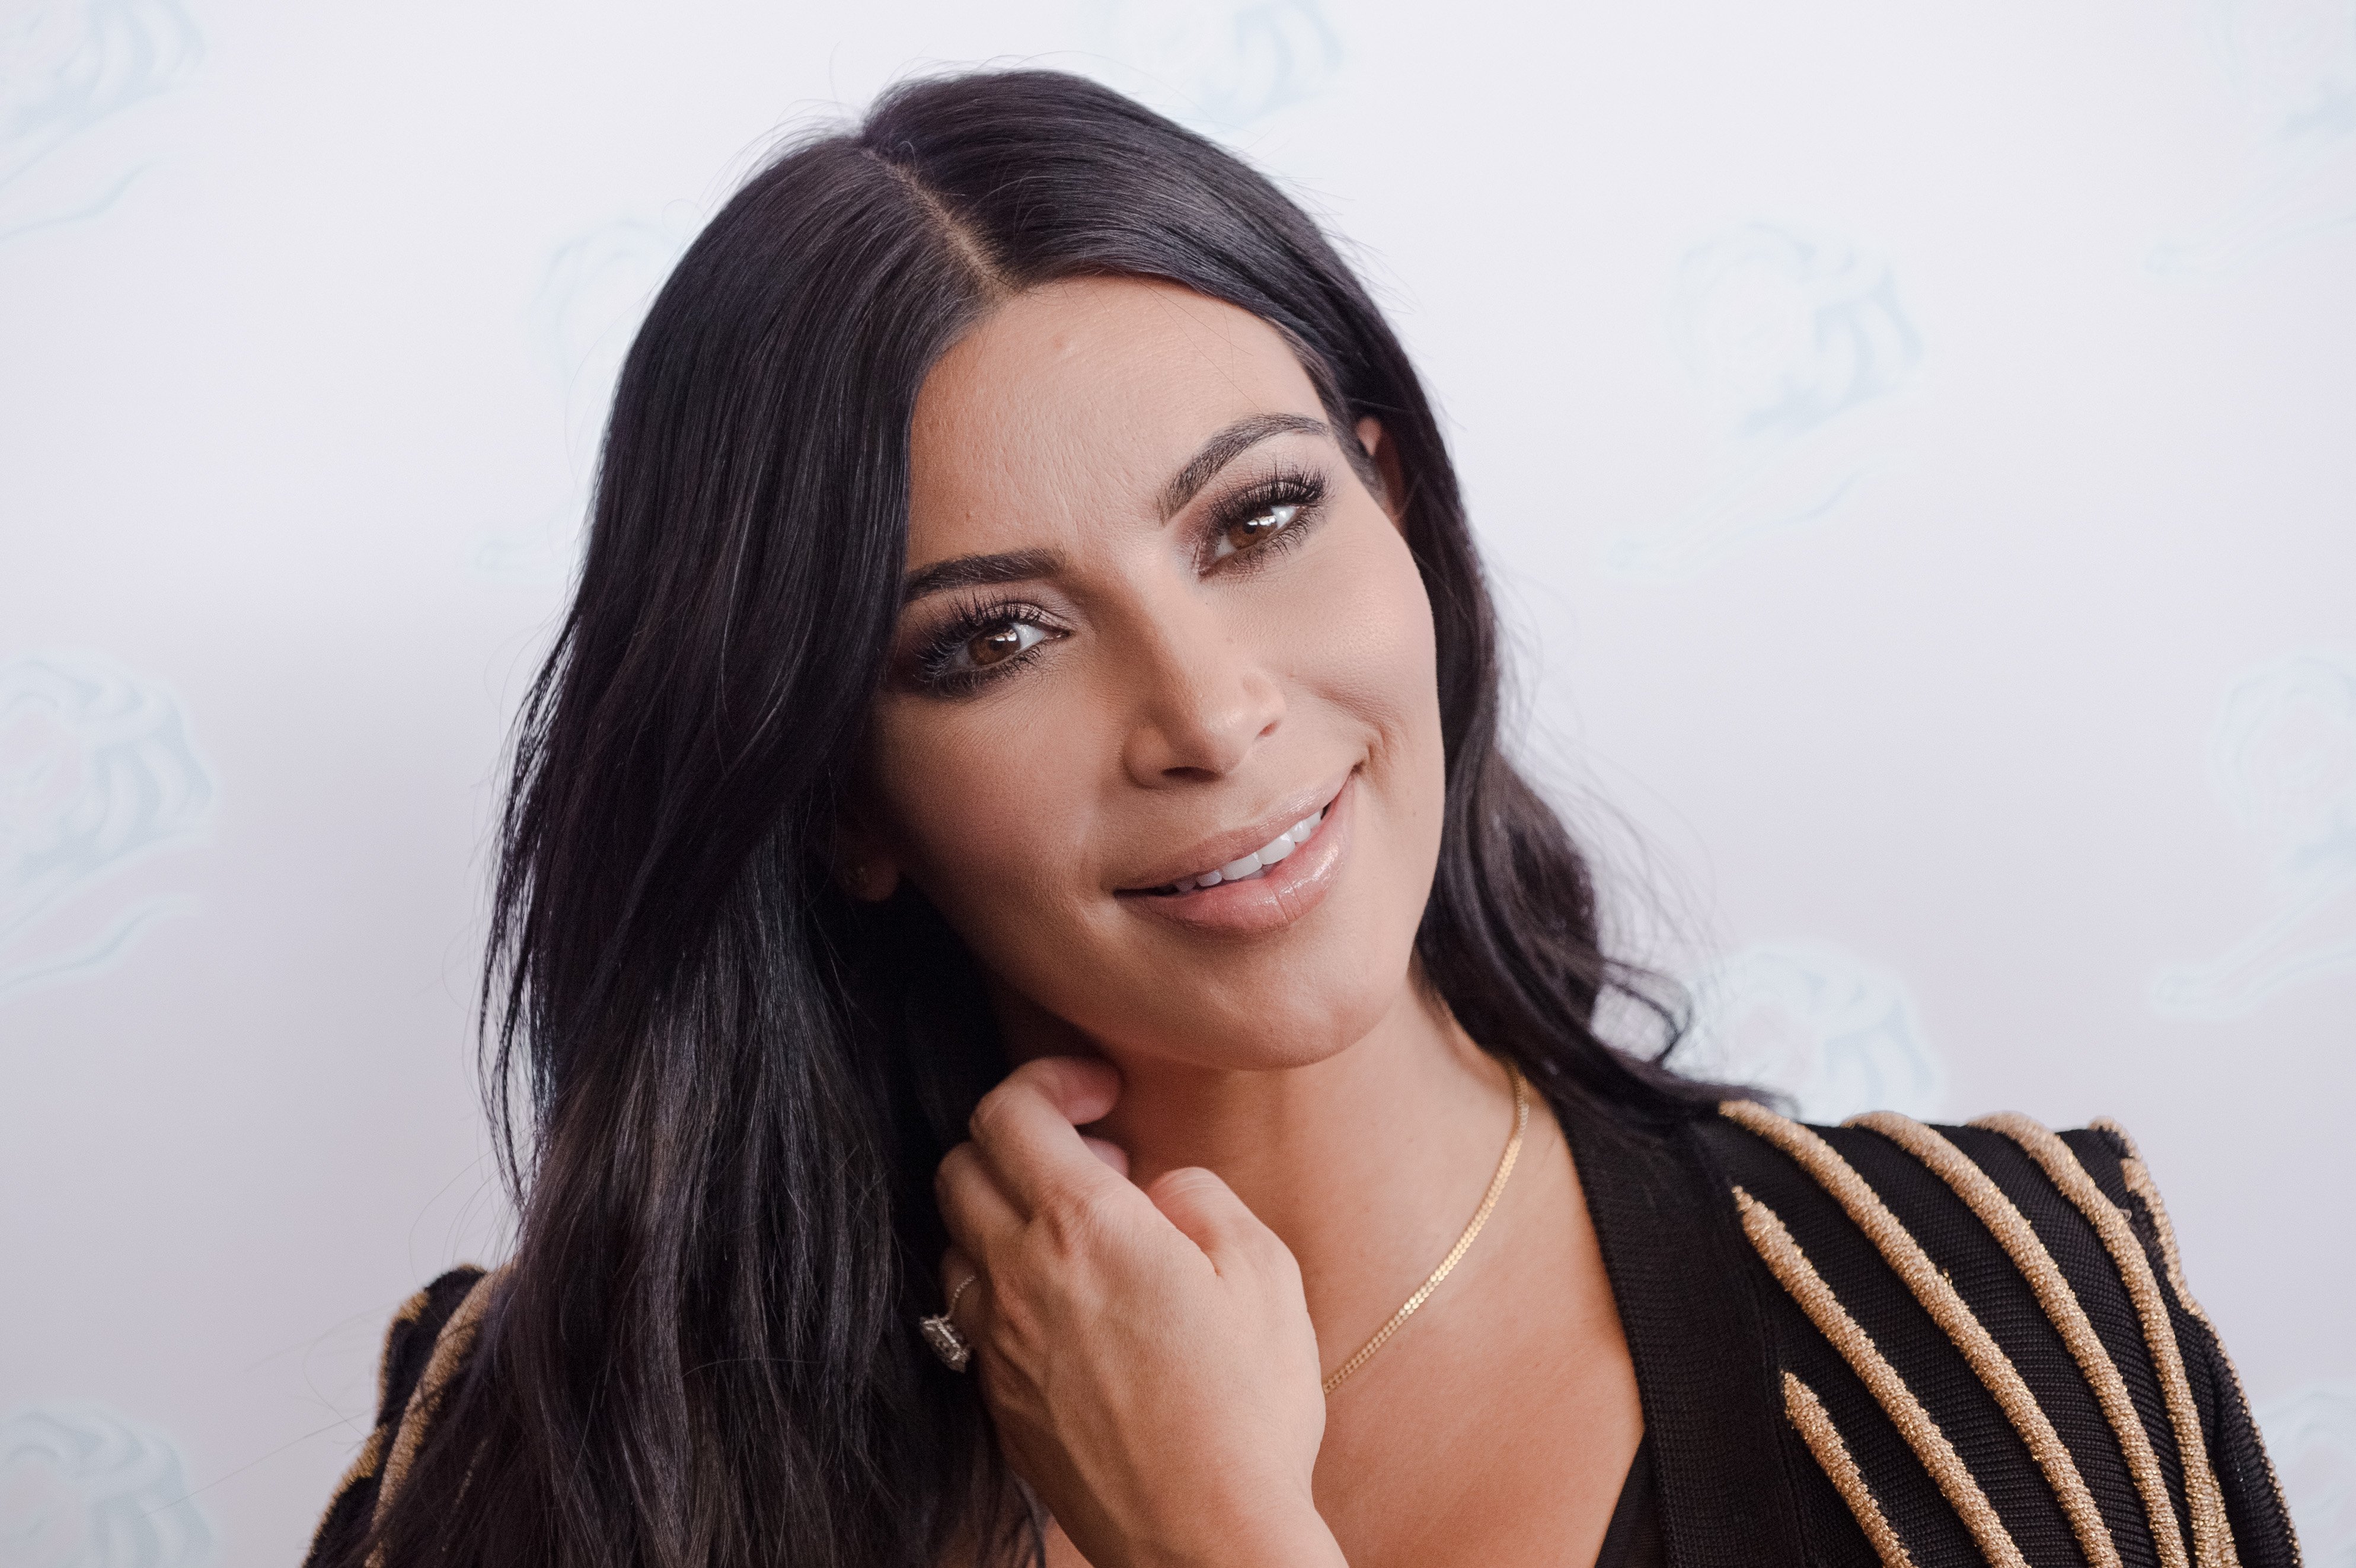 Kim Kardashian at the Cannes Lions International Festival of Creativity in June 2015. | Photo: Getty Images